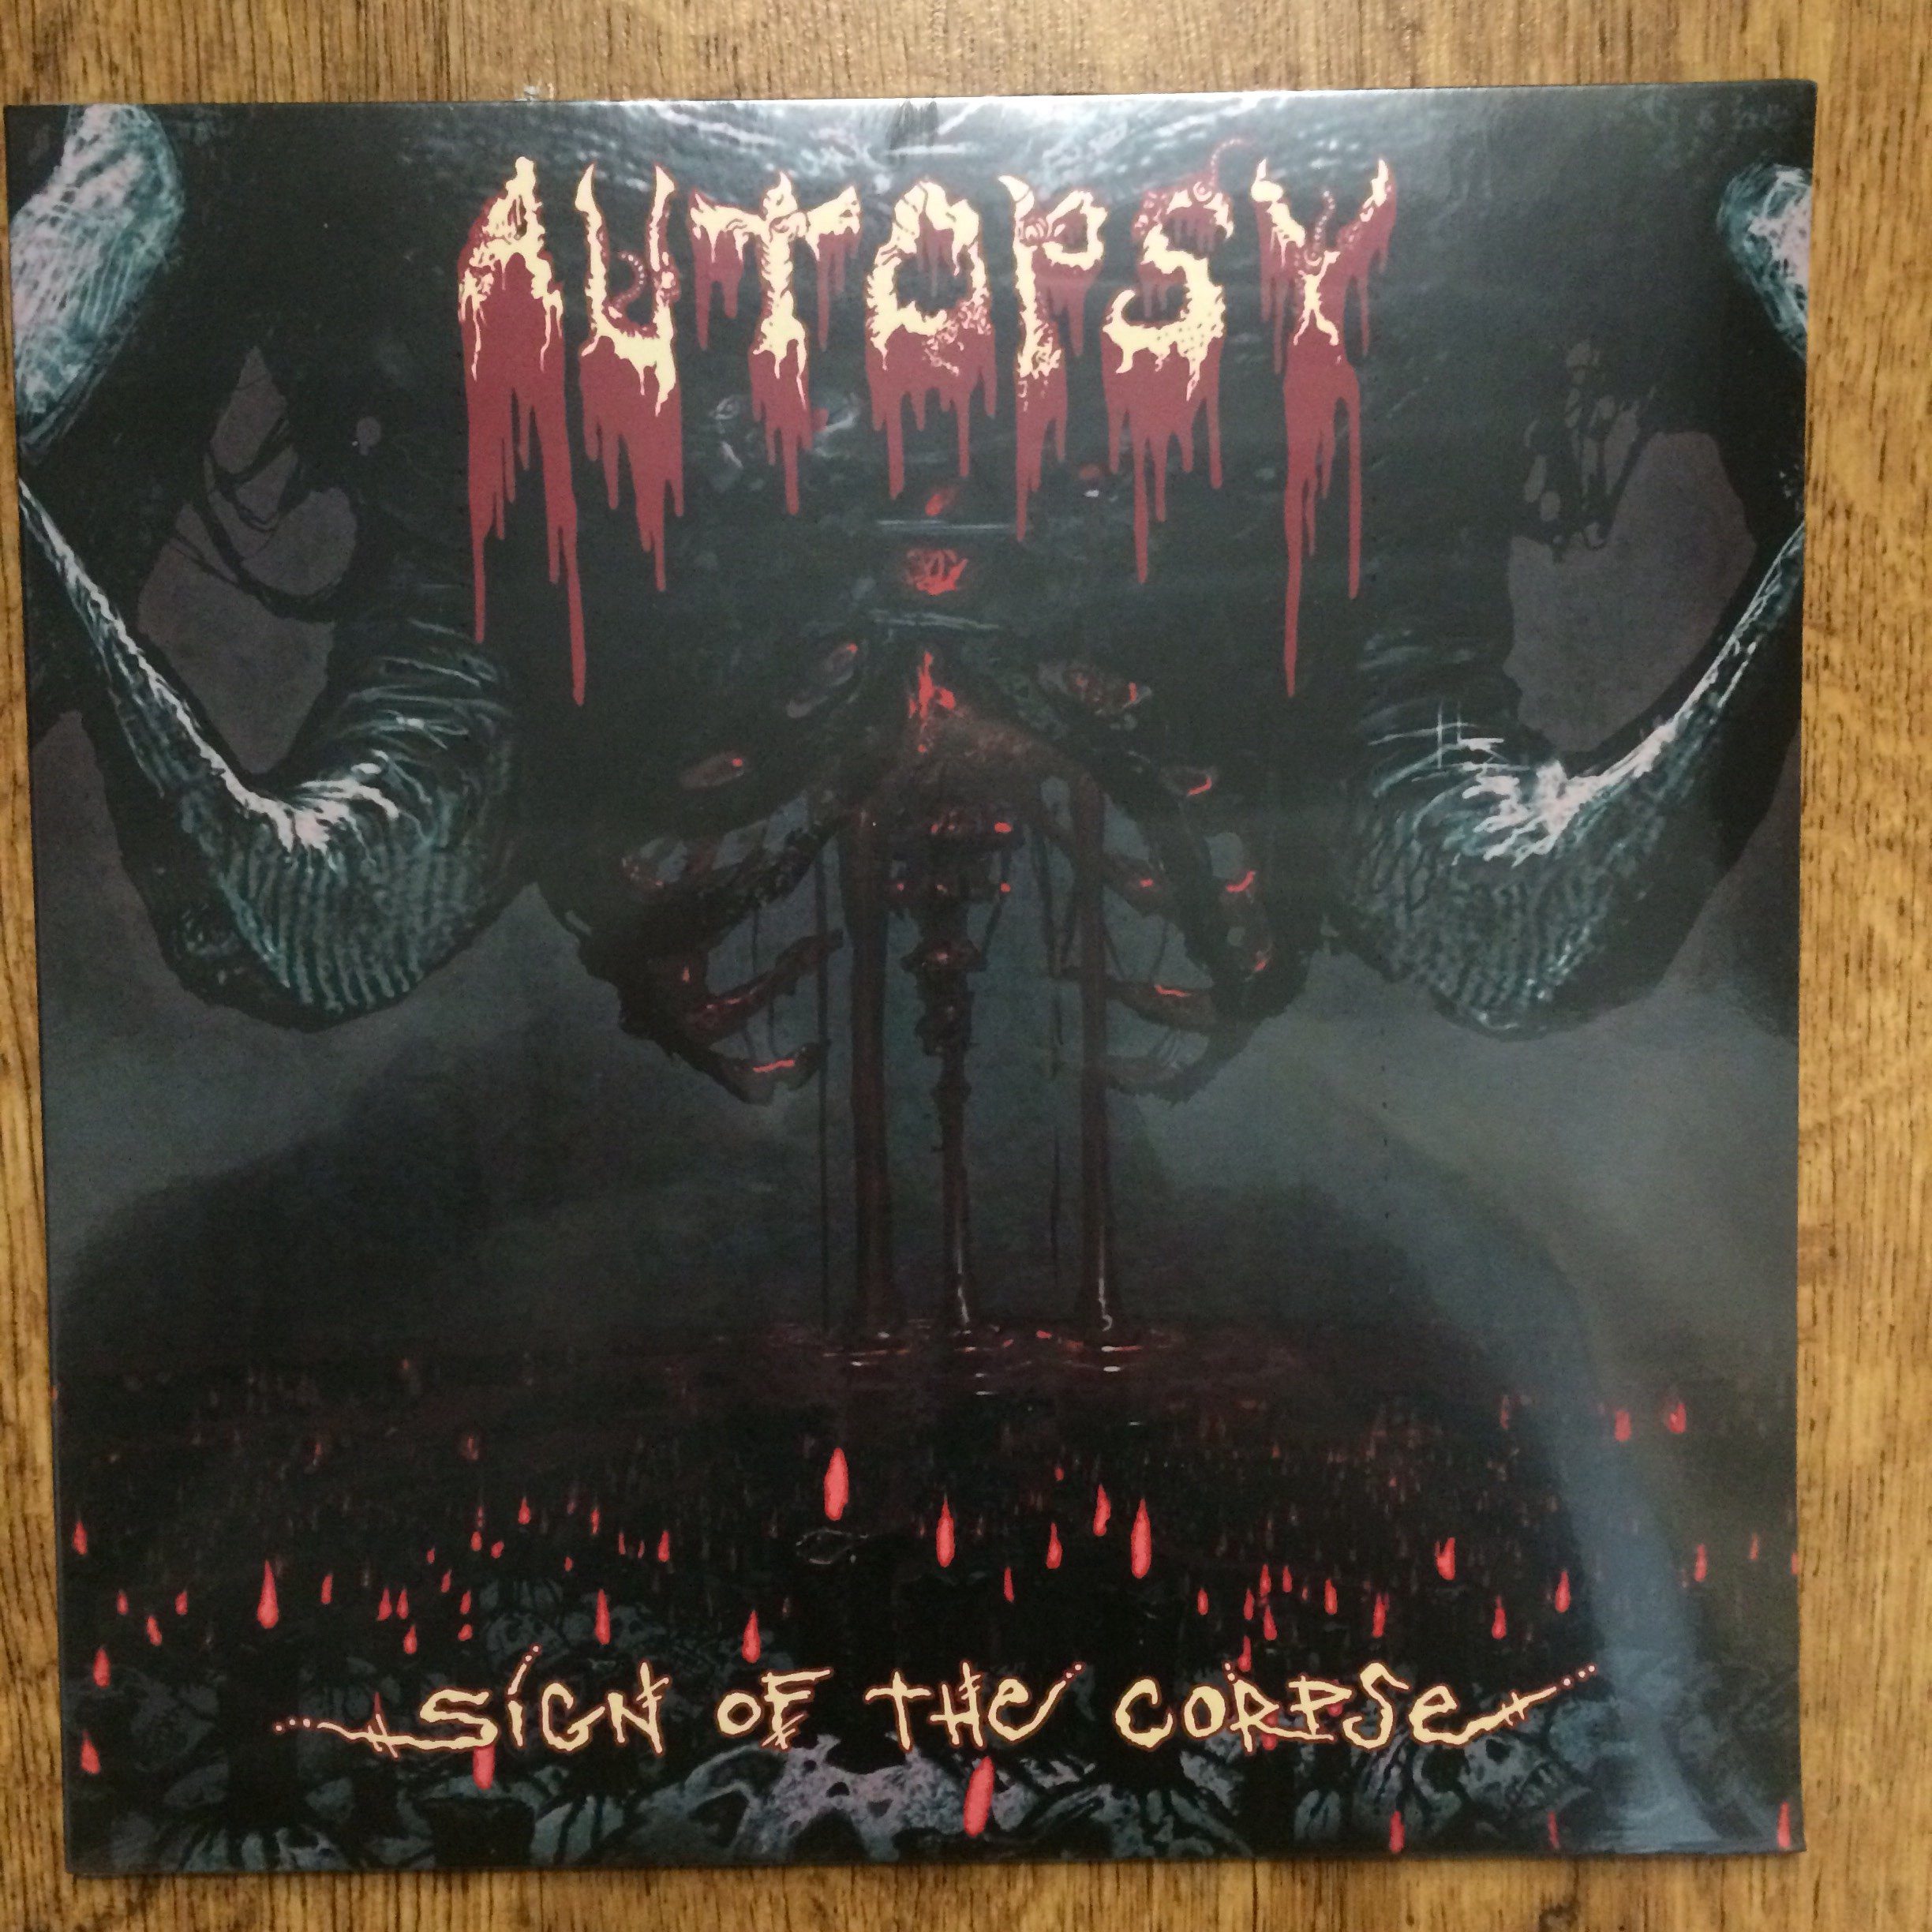 Photo of the Autopsy - "Sign of the Corpse" LP (Black vinyl)